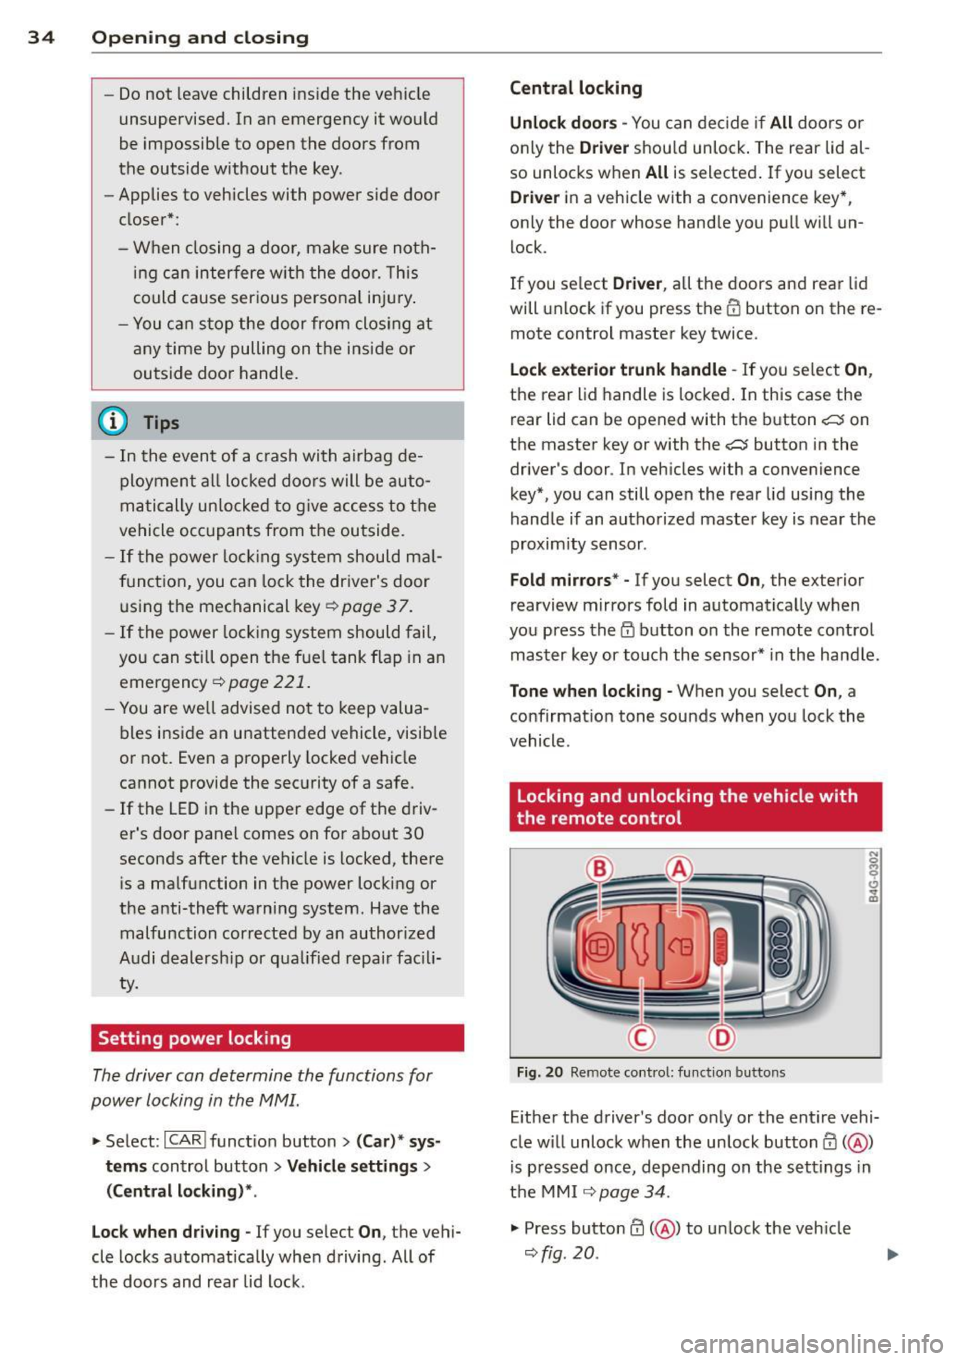 AUDI S7 2015 Owners Guide 34  Openin g and  clo sing 
- Do not  leave  children  inside  the  veh icle 
unsupervised.  In  an  emergency  it  would 
be  impossible  to  open  the  doors  from 
the  outside  without  the  key. 